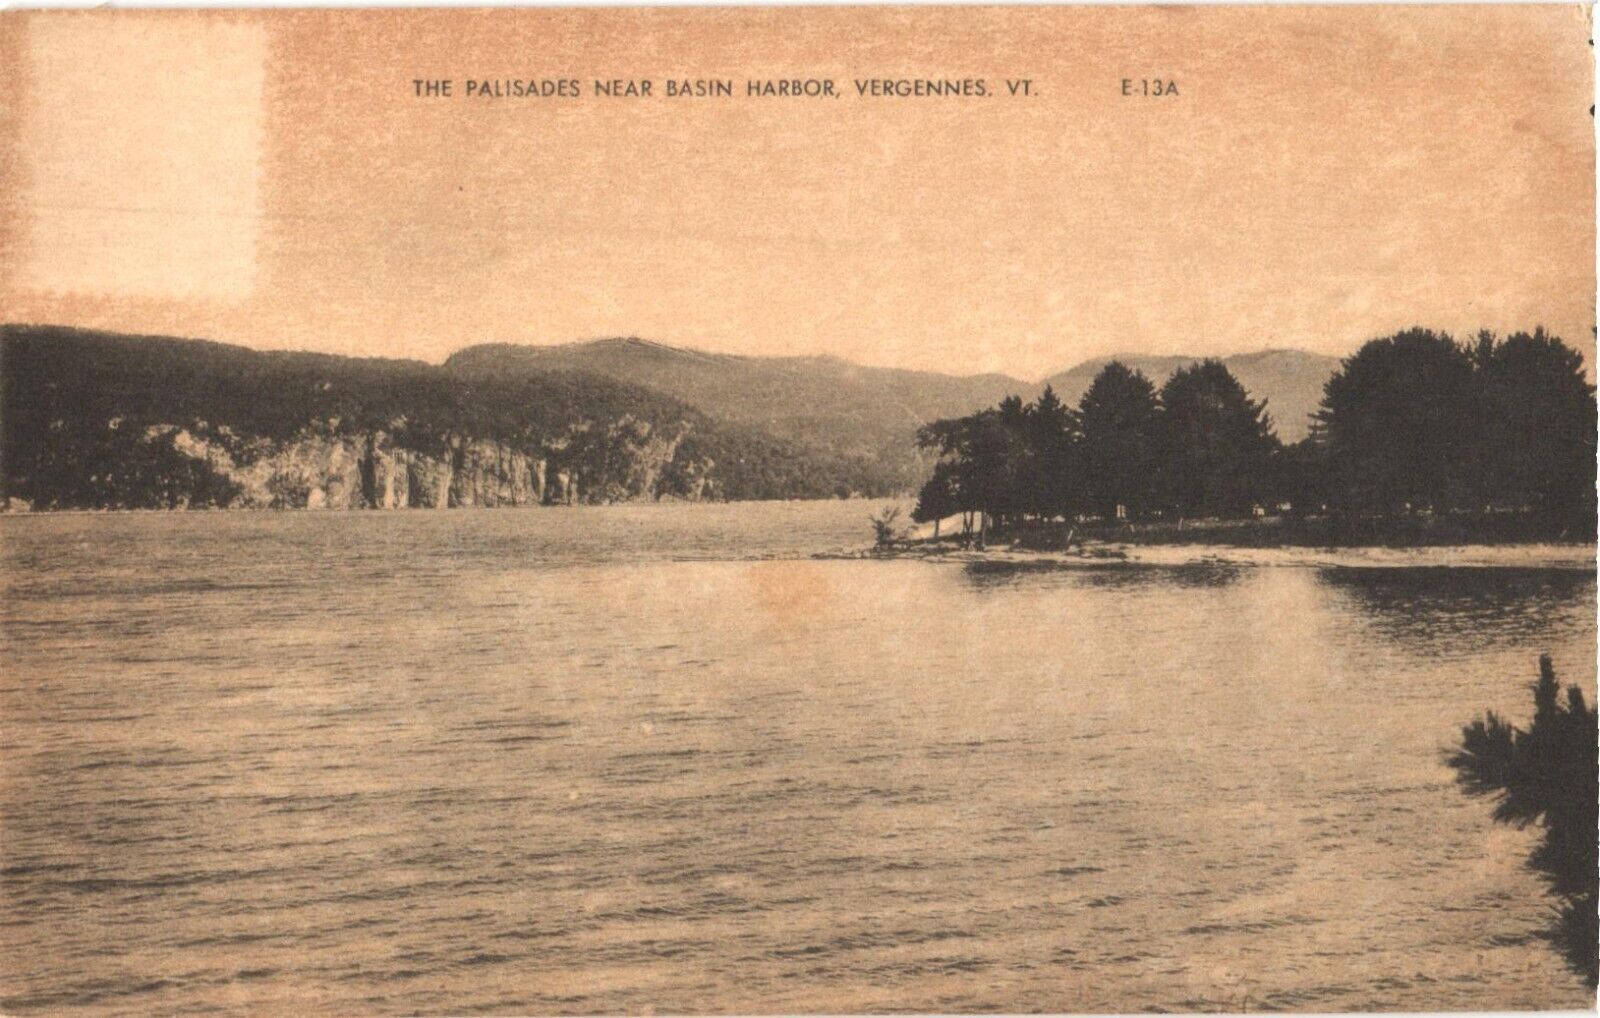 Scenic View of The Palisades Near Basin Harbor, Vergennes, Vermont Postcard